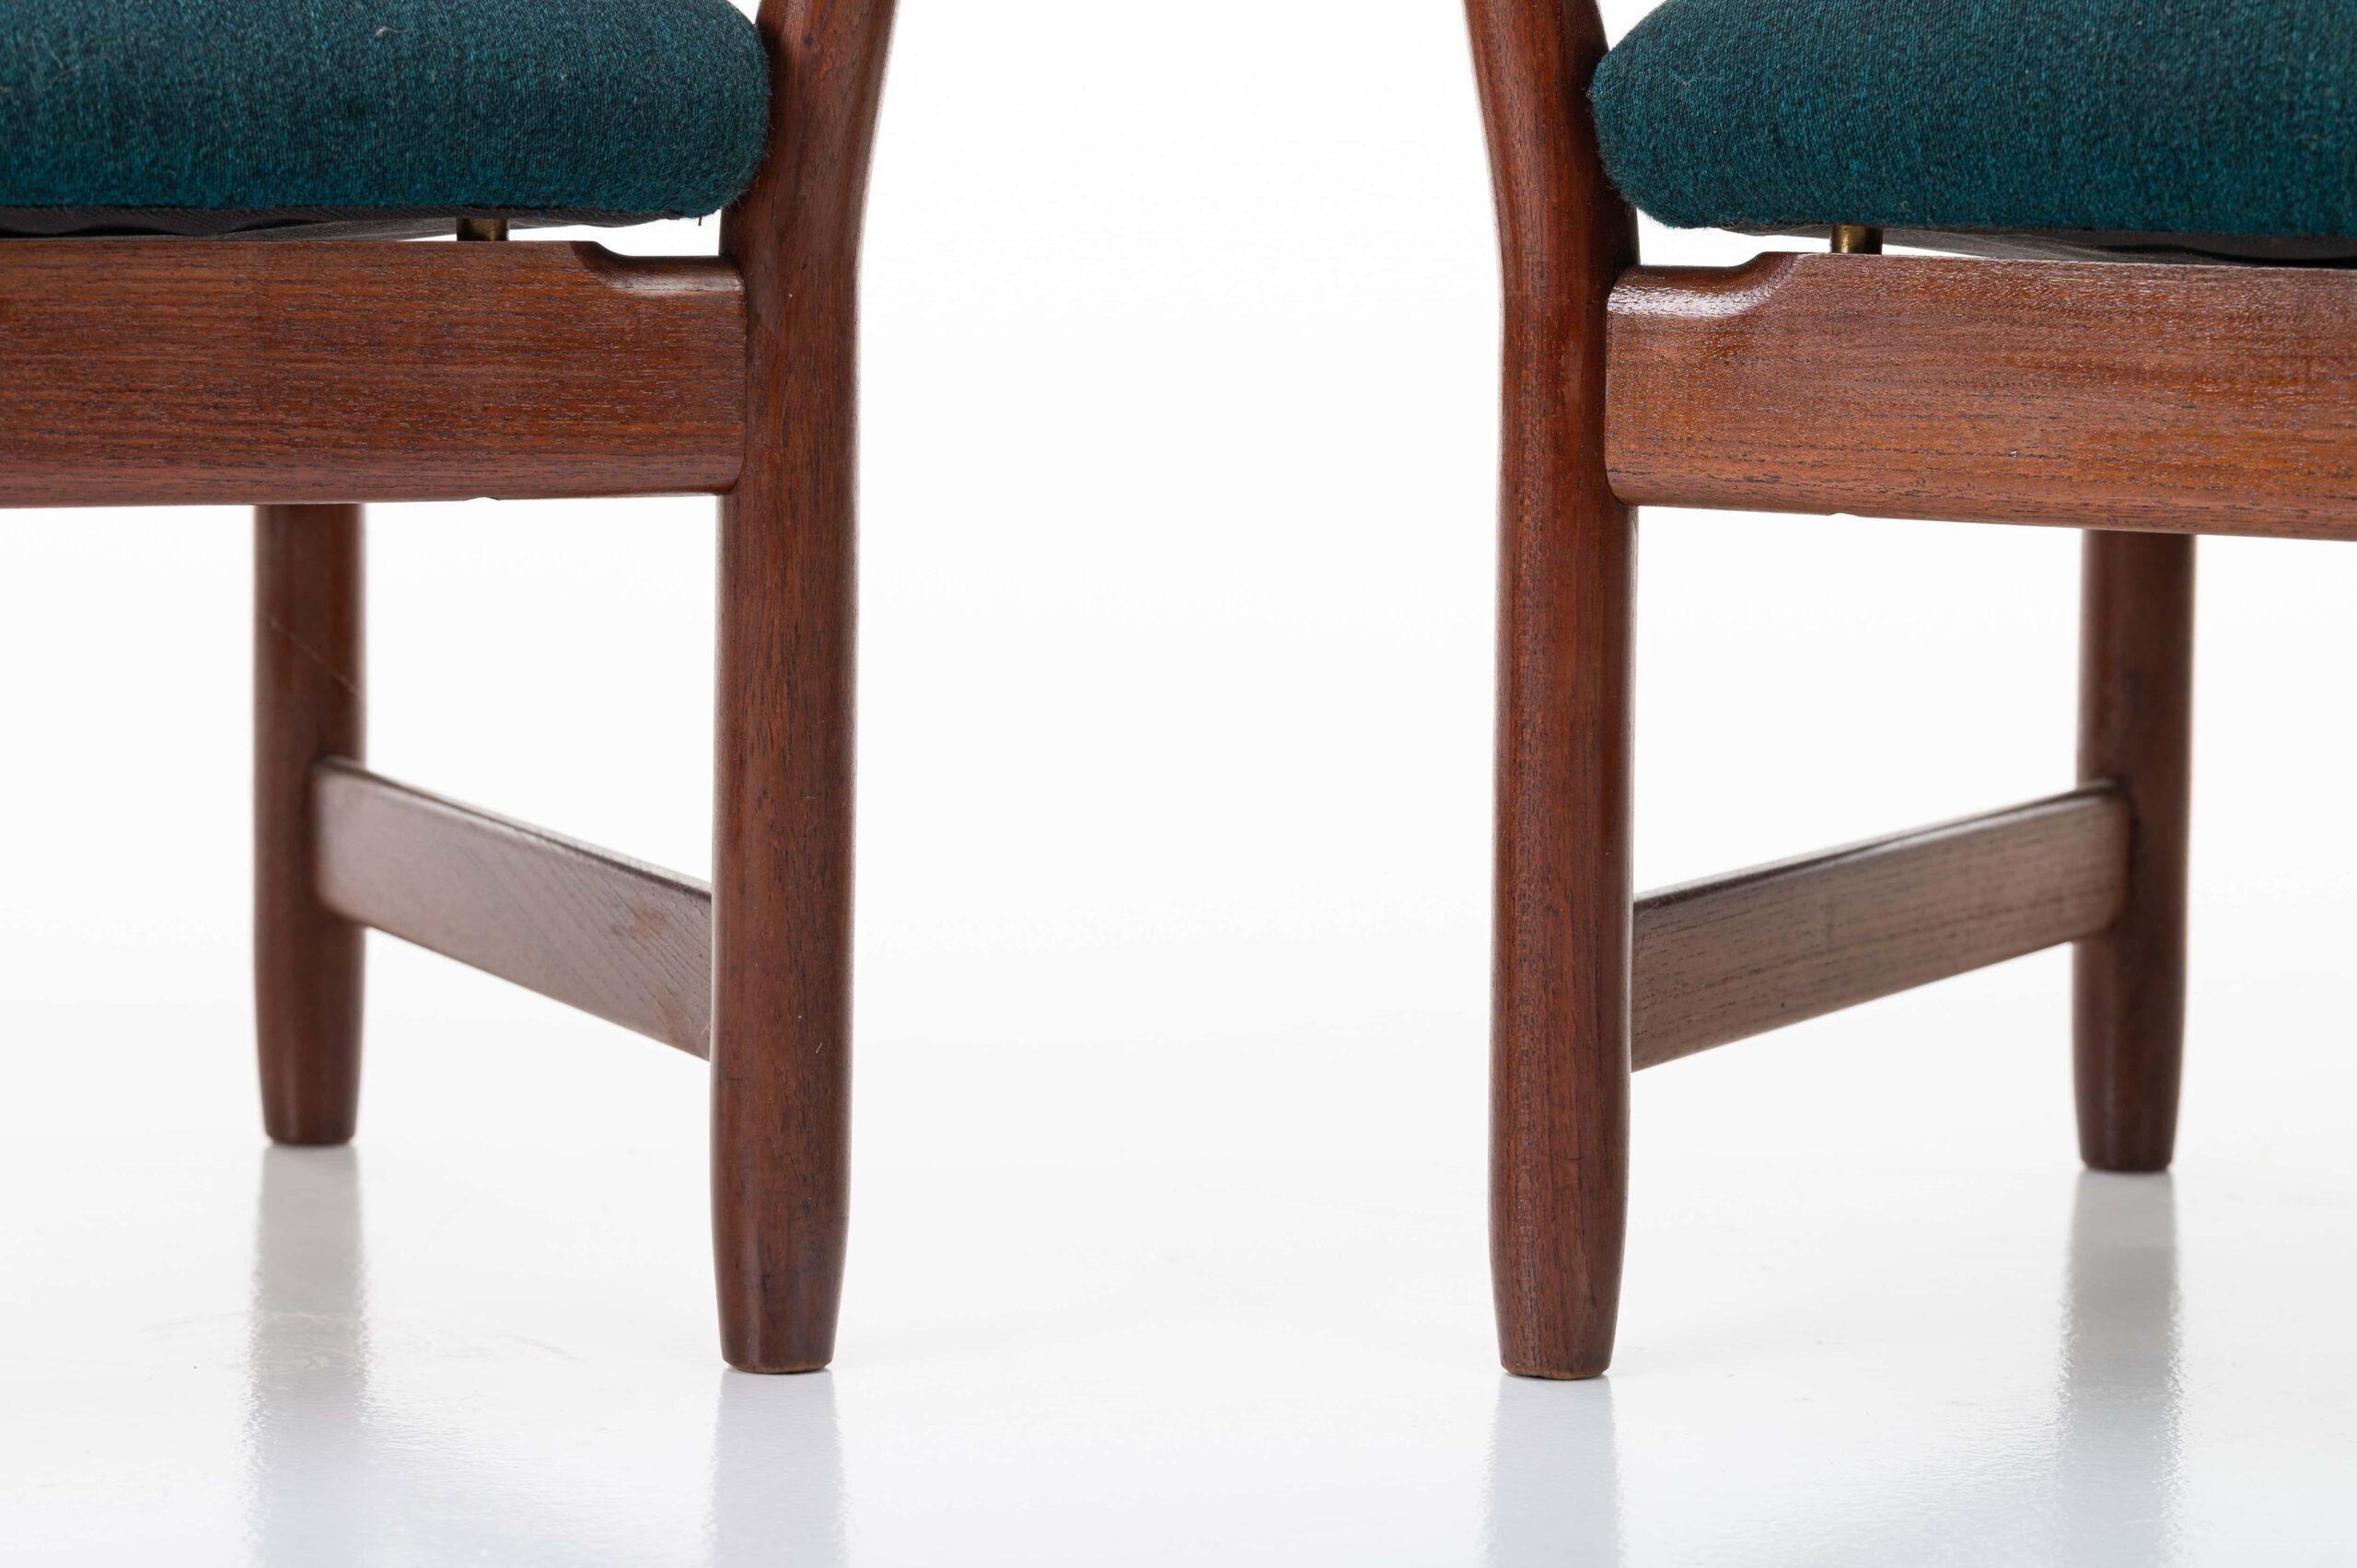 'Fireplace' Lounge Chairs by Fredrik Kayser and Adolf Relling for Dokka Møbler 1